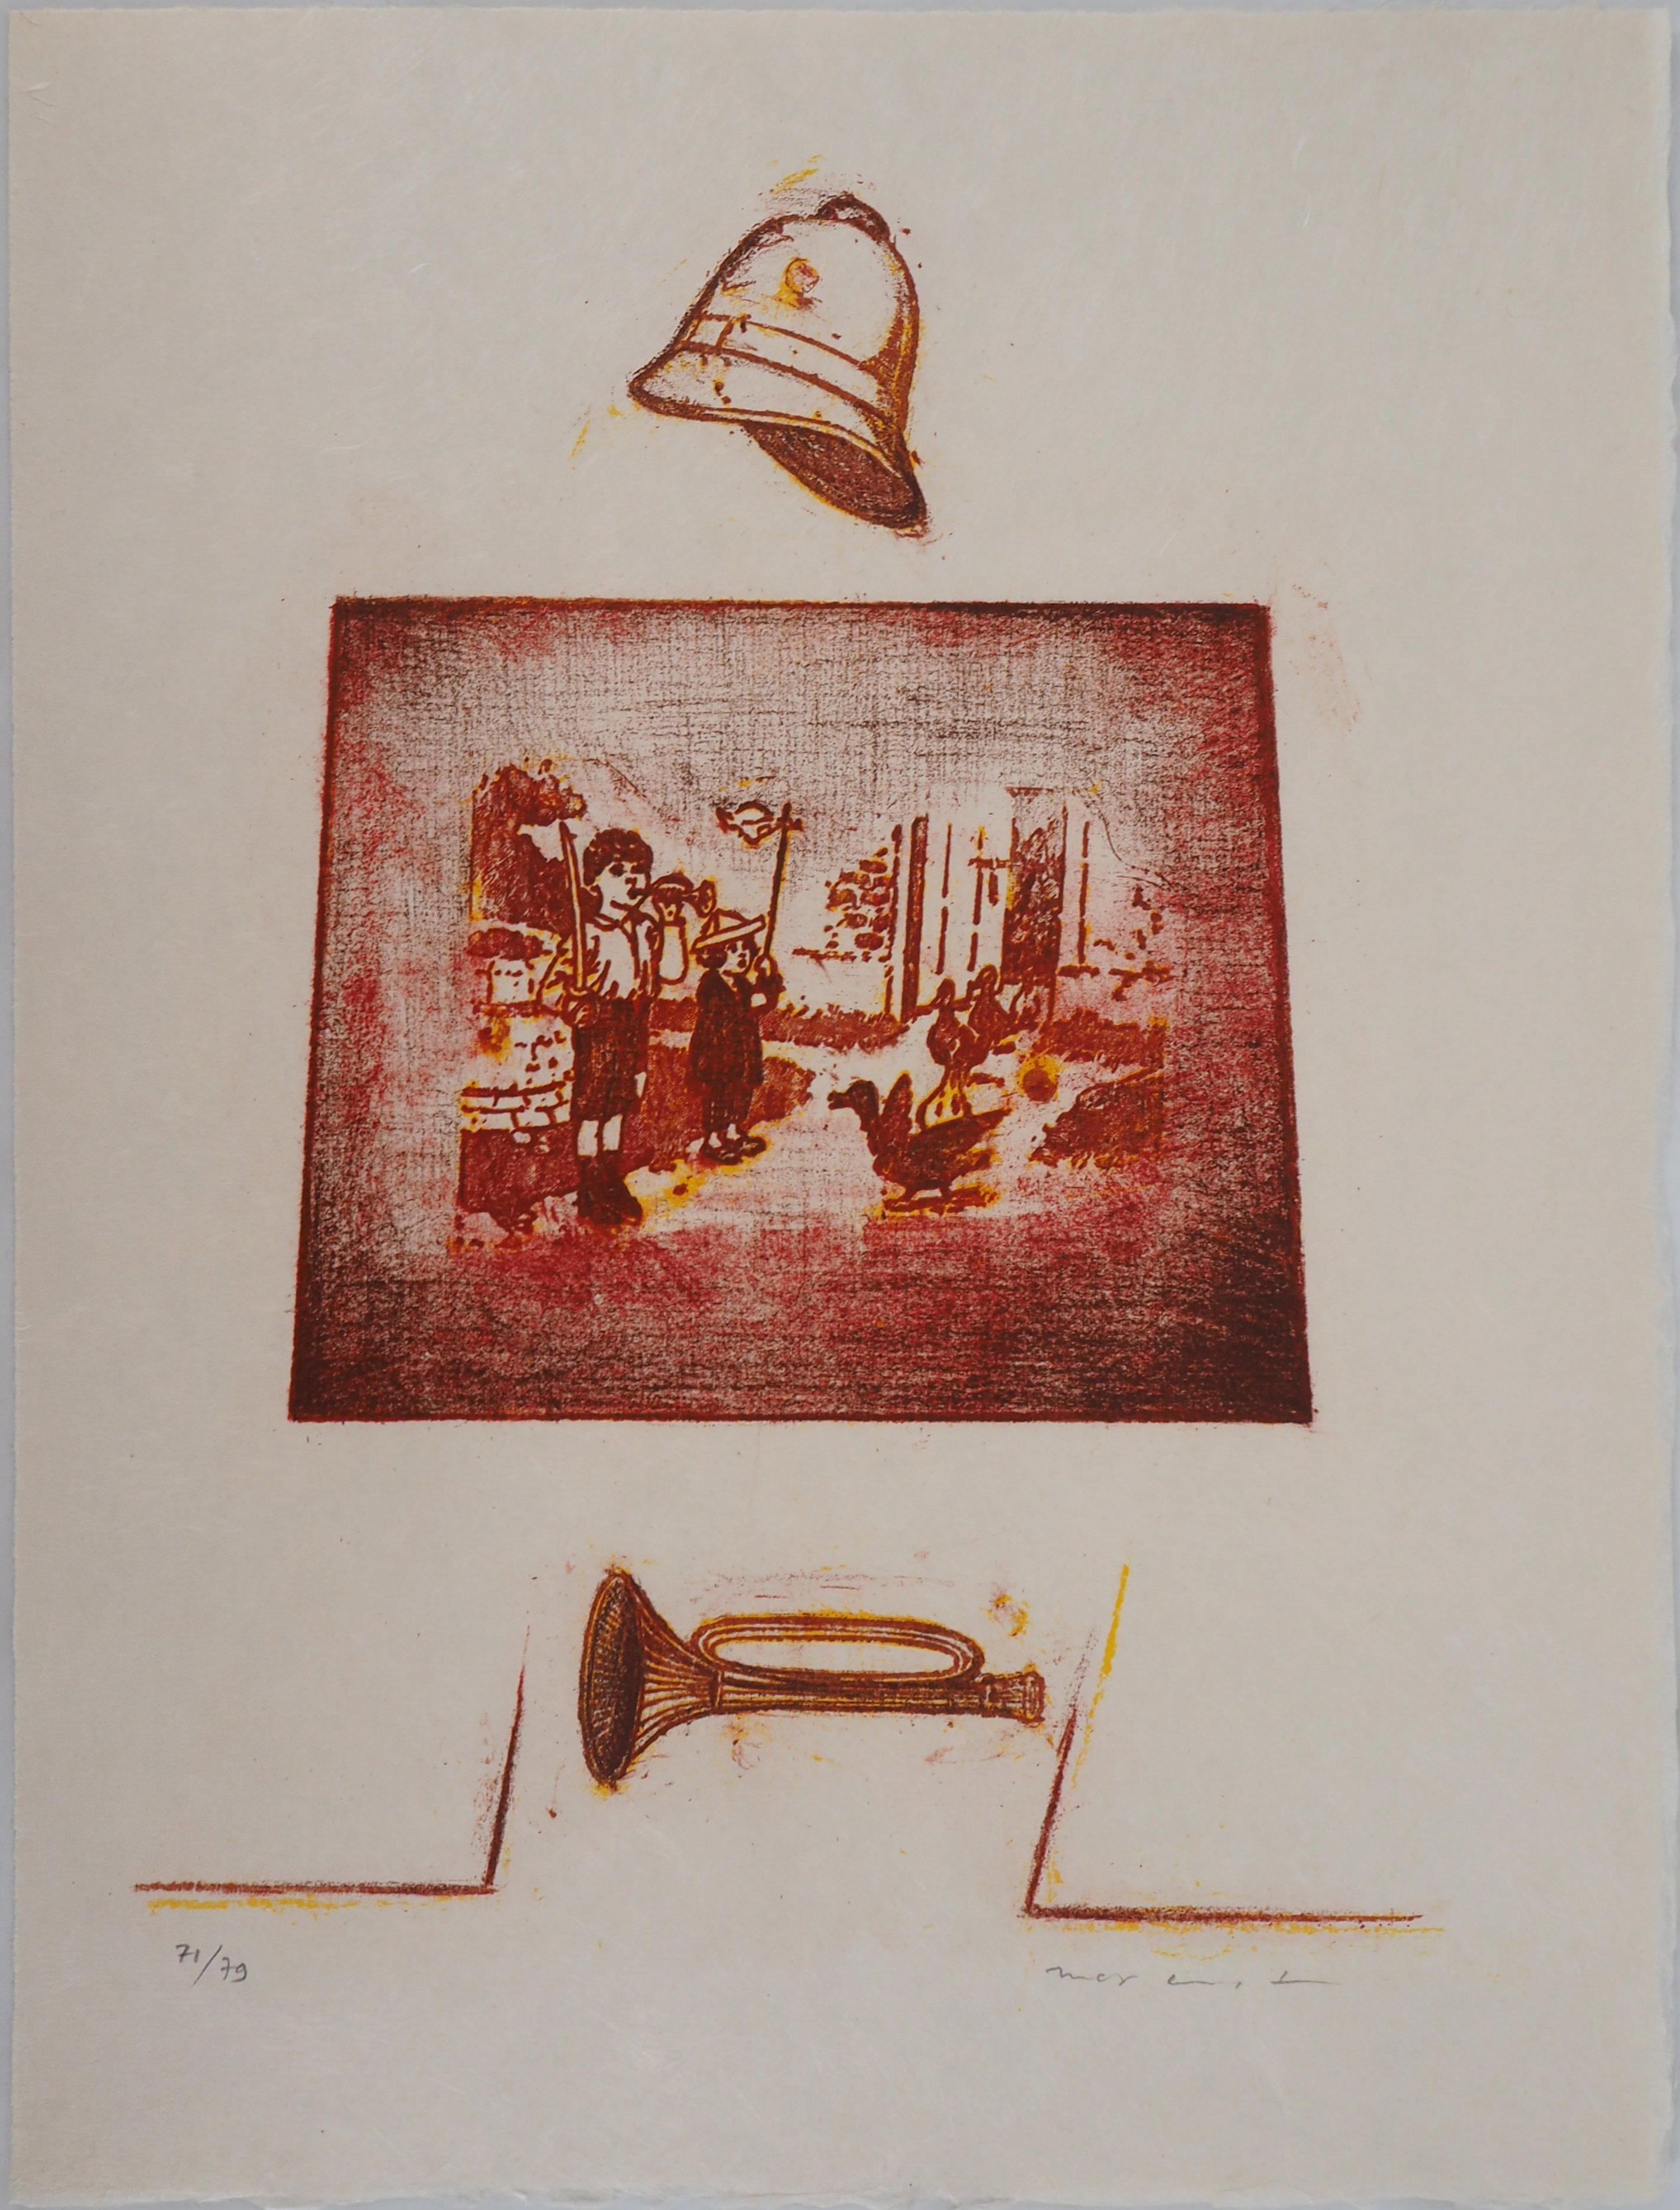 Red Memory - Original Lithograph Handsigned and limited 79 copies - Mourlot 1972 - Print by Max Ernst